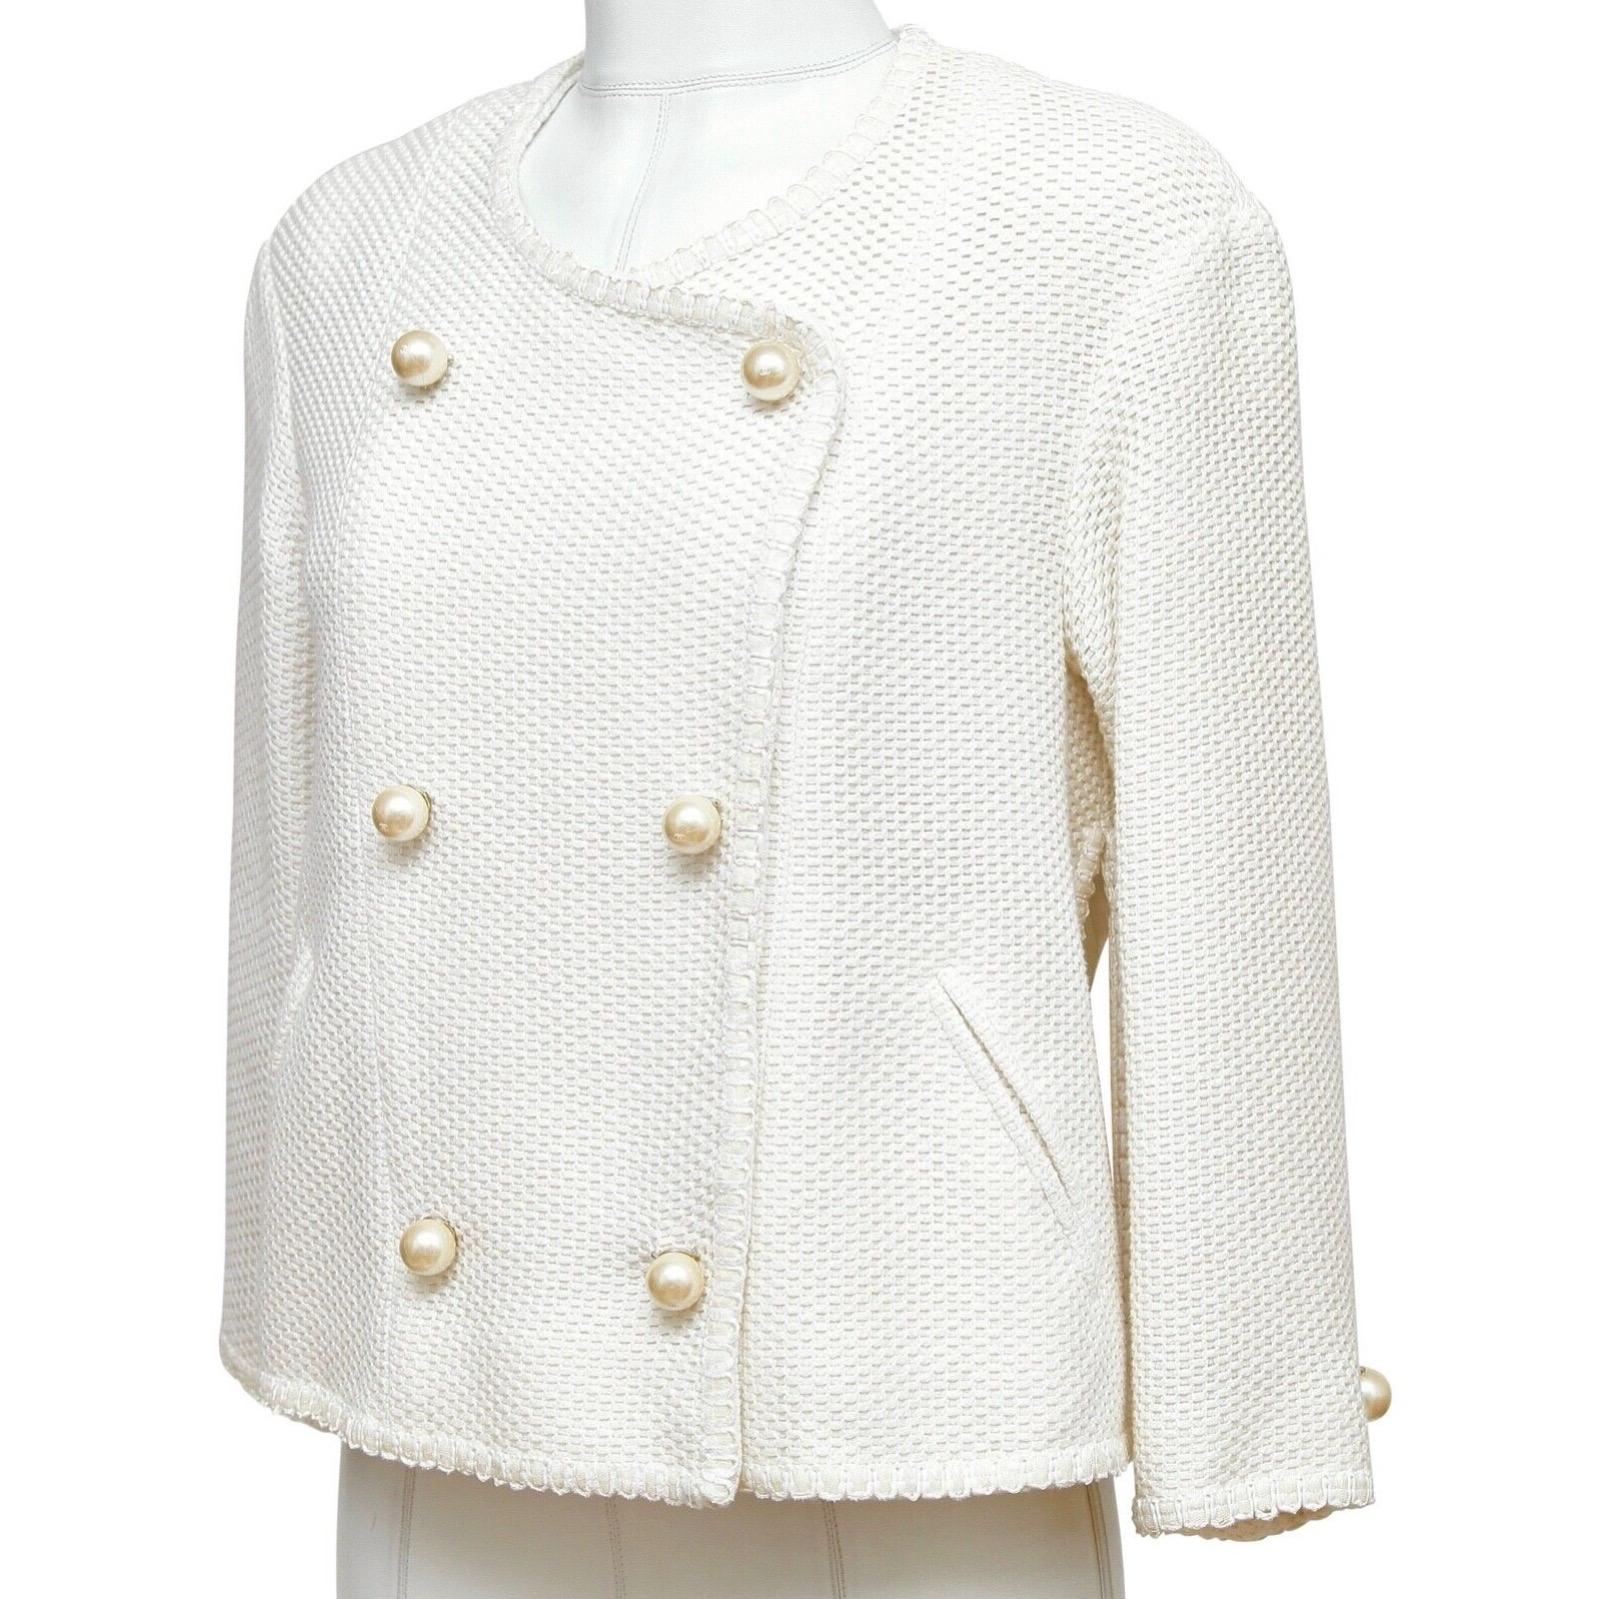 Gray CHANEL Tweed Jacket Coat White Pearl 3/4 Sleeve Double Breasted 2013 13S Sz 34 For Sale